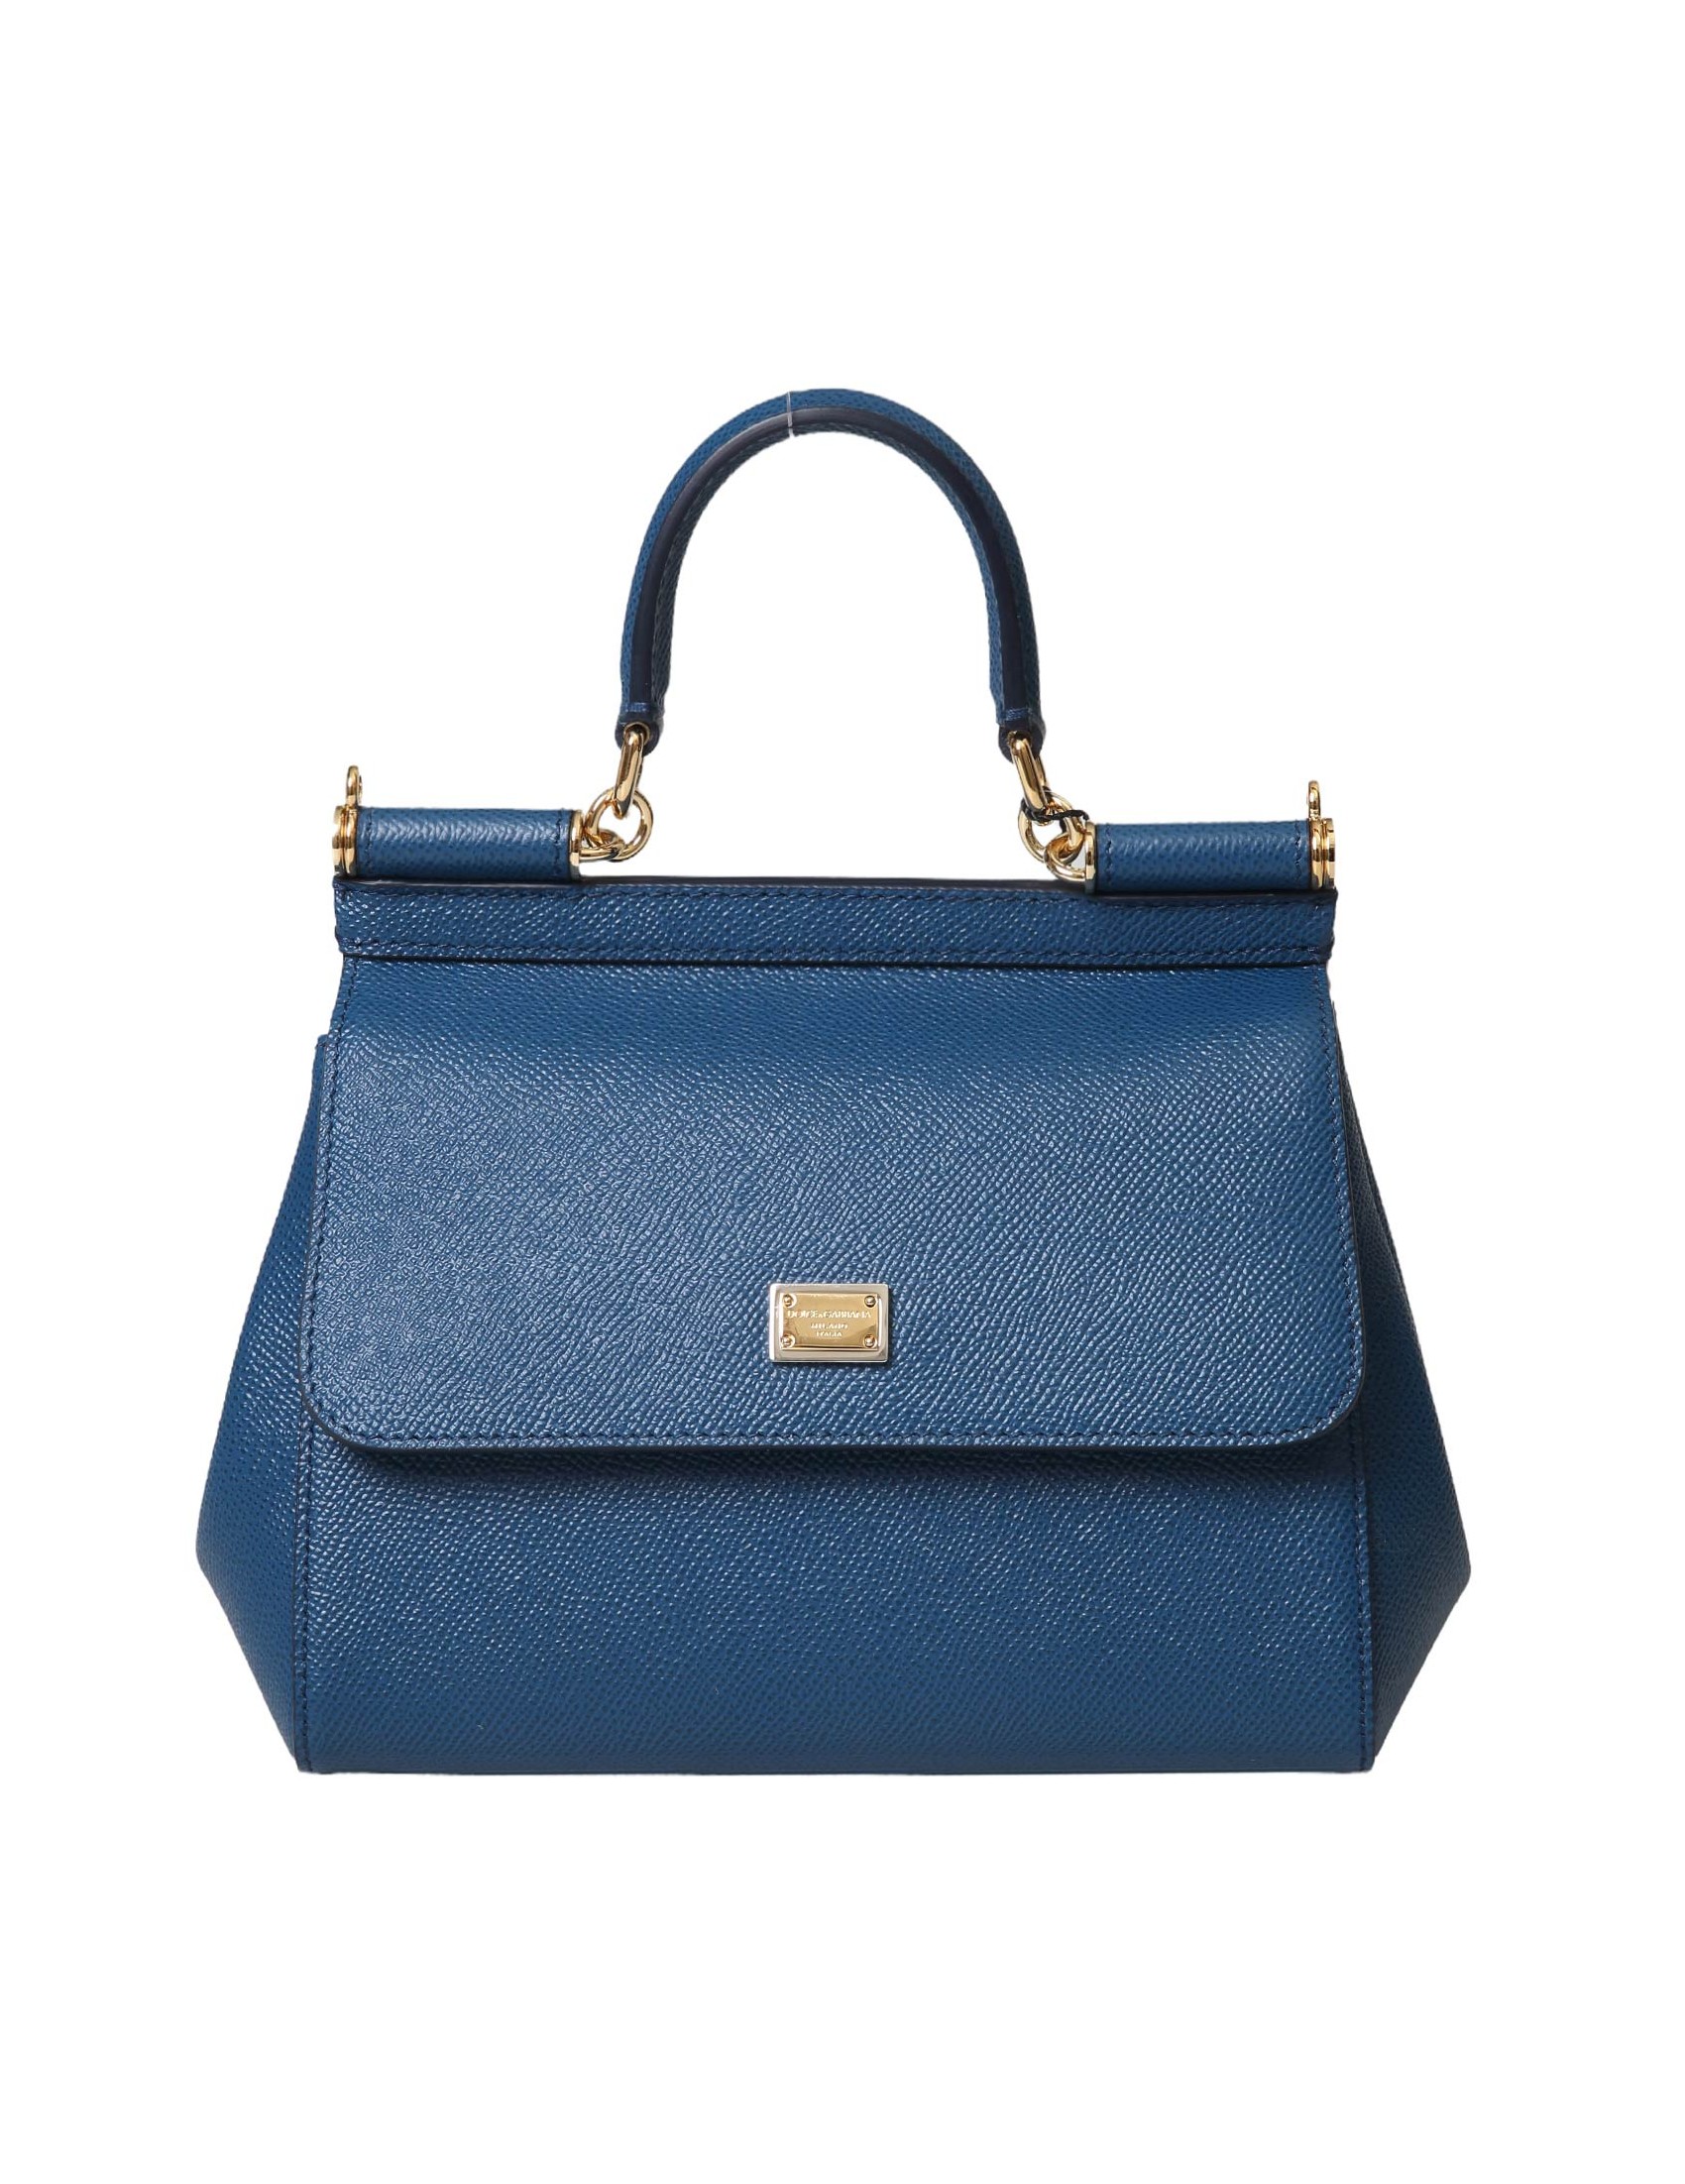 DOLCE & GABBANA SMALL SICILY BAG IN BLU ROYAL DAUPHINE LEATHER